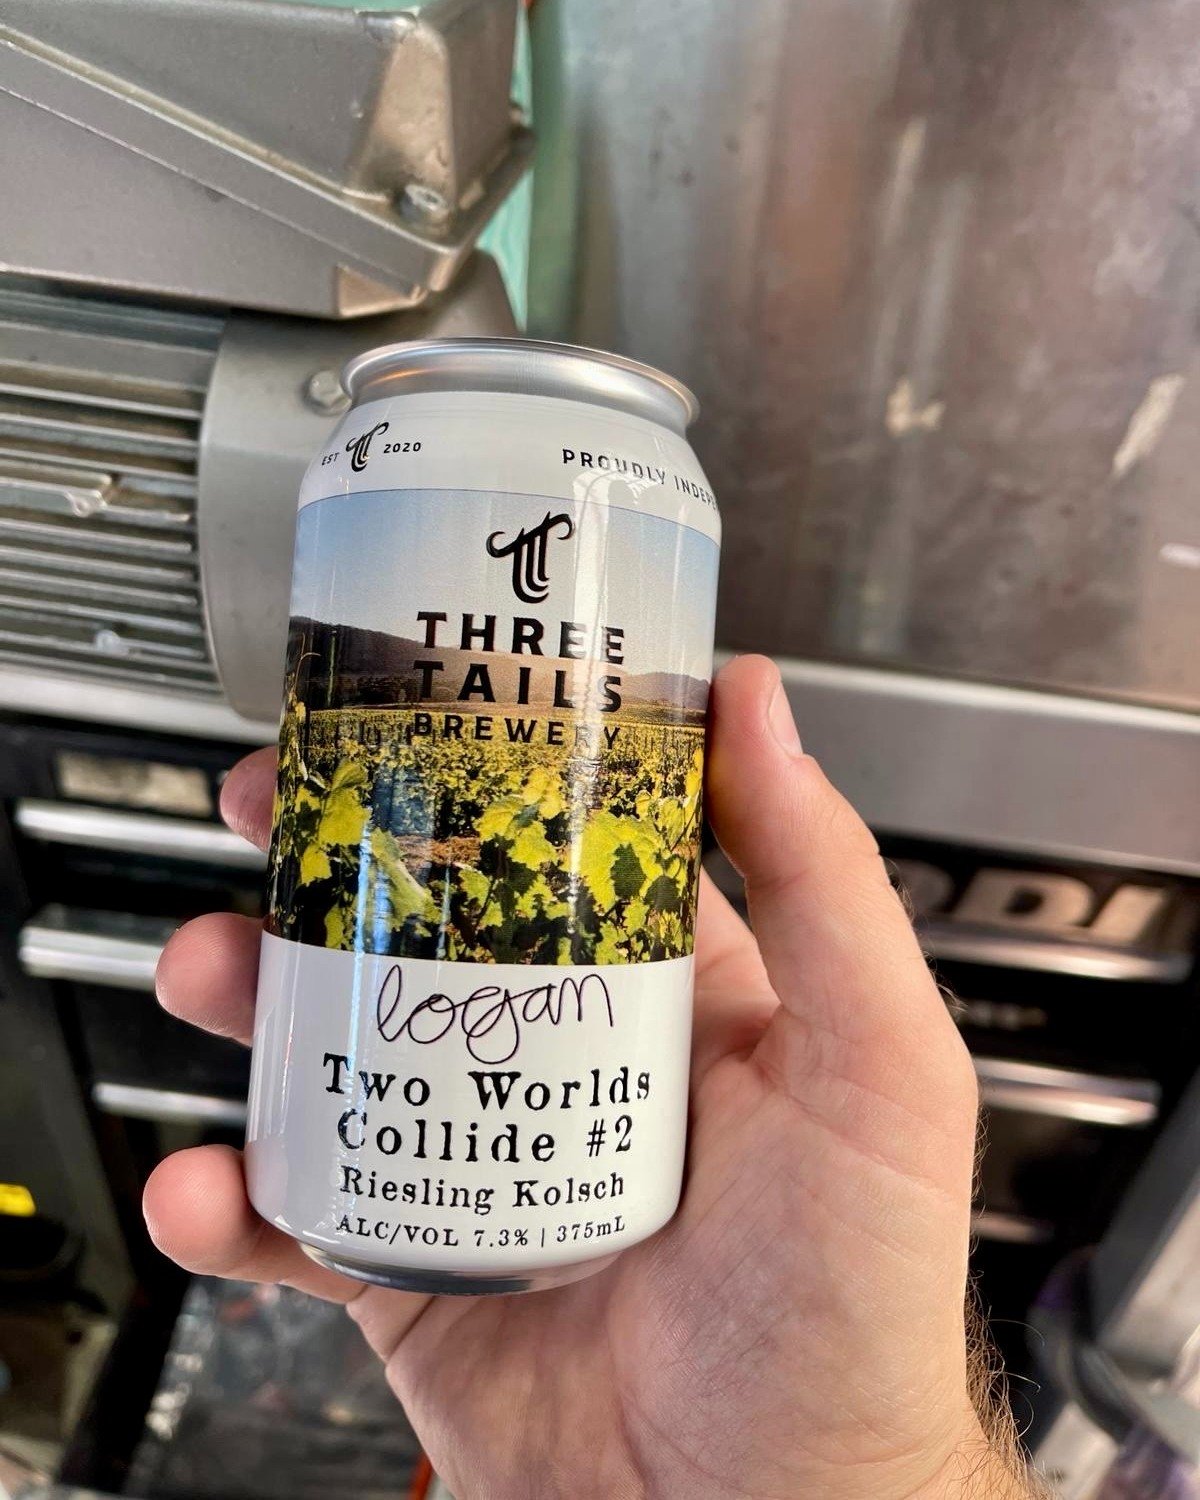 TWO WORLDS COLLIDE | Beer lovers, say hello to our brand new beer, Two Worlds Collide 2.0, which perfectly sums up our collab with @logan_wines 🍻 A Riesling Kolsch that brings together our brewing expertise, with some of Logan&rsquo;s delicious grap